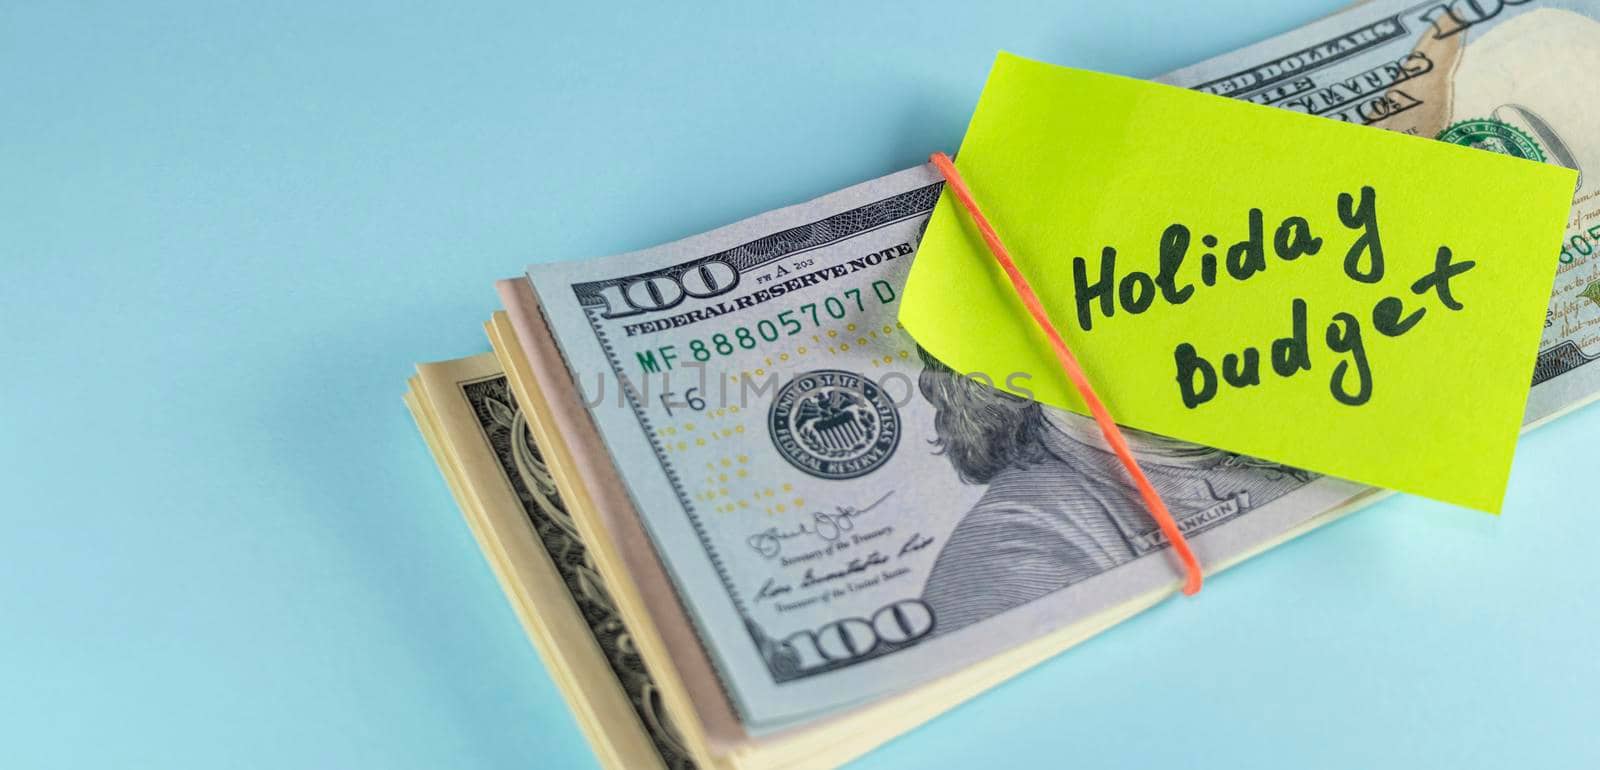 banner with text written note Holiday budget, dollars cash money in rubber band with note, on copy space background - concept of financial planning of set budget for Christmas or holiday by Leoschka